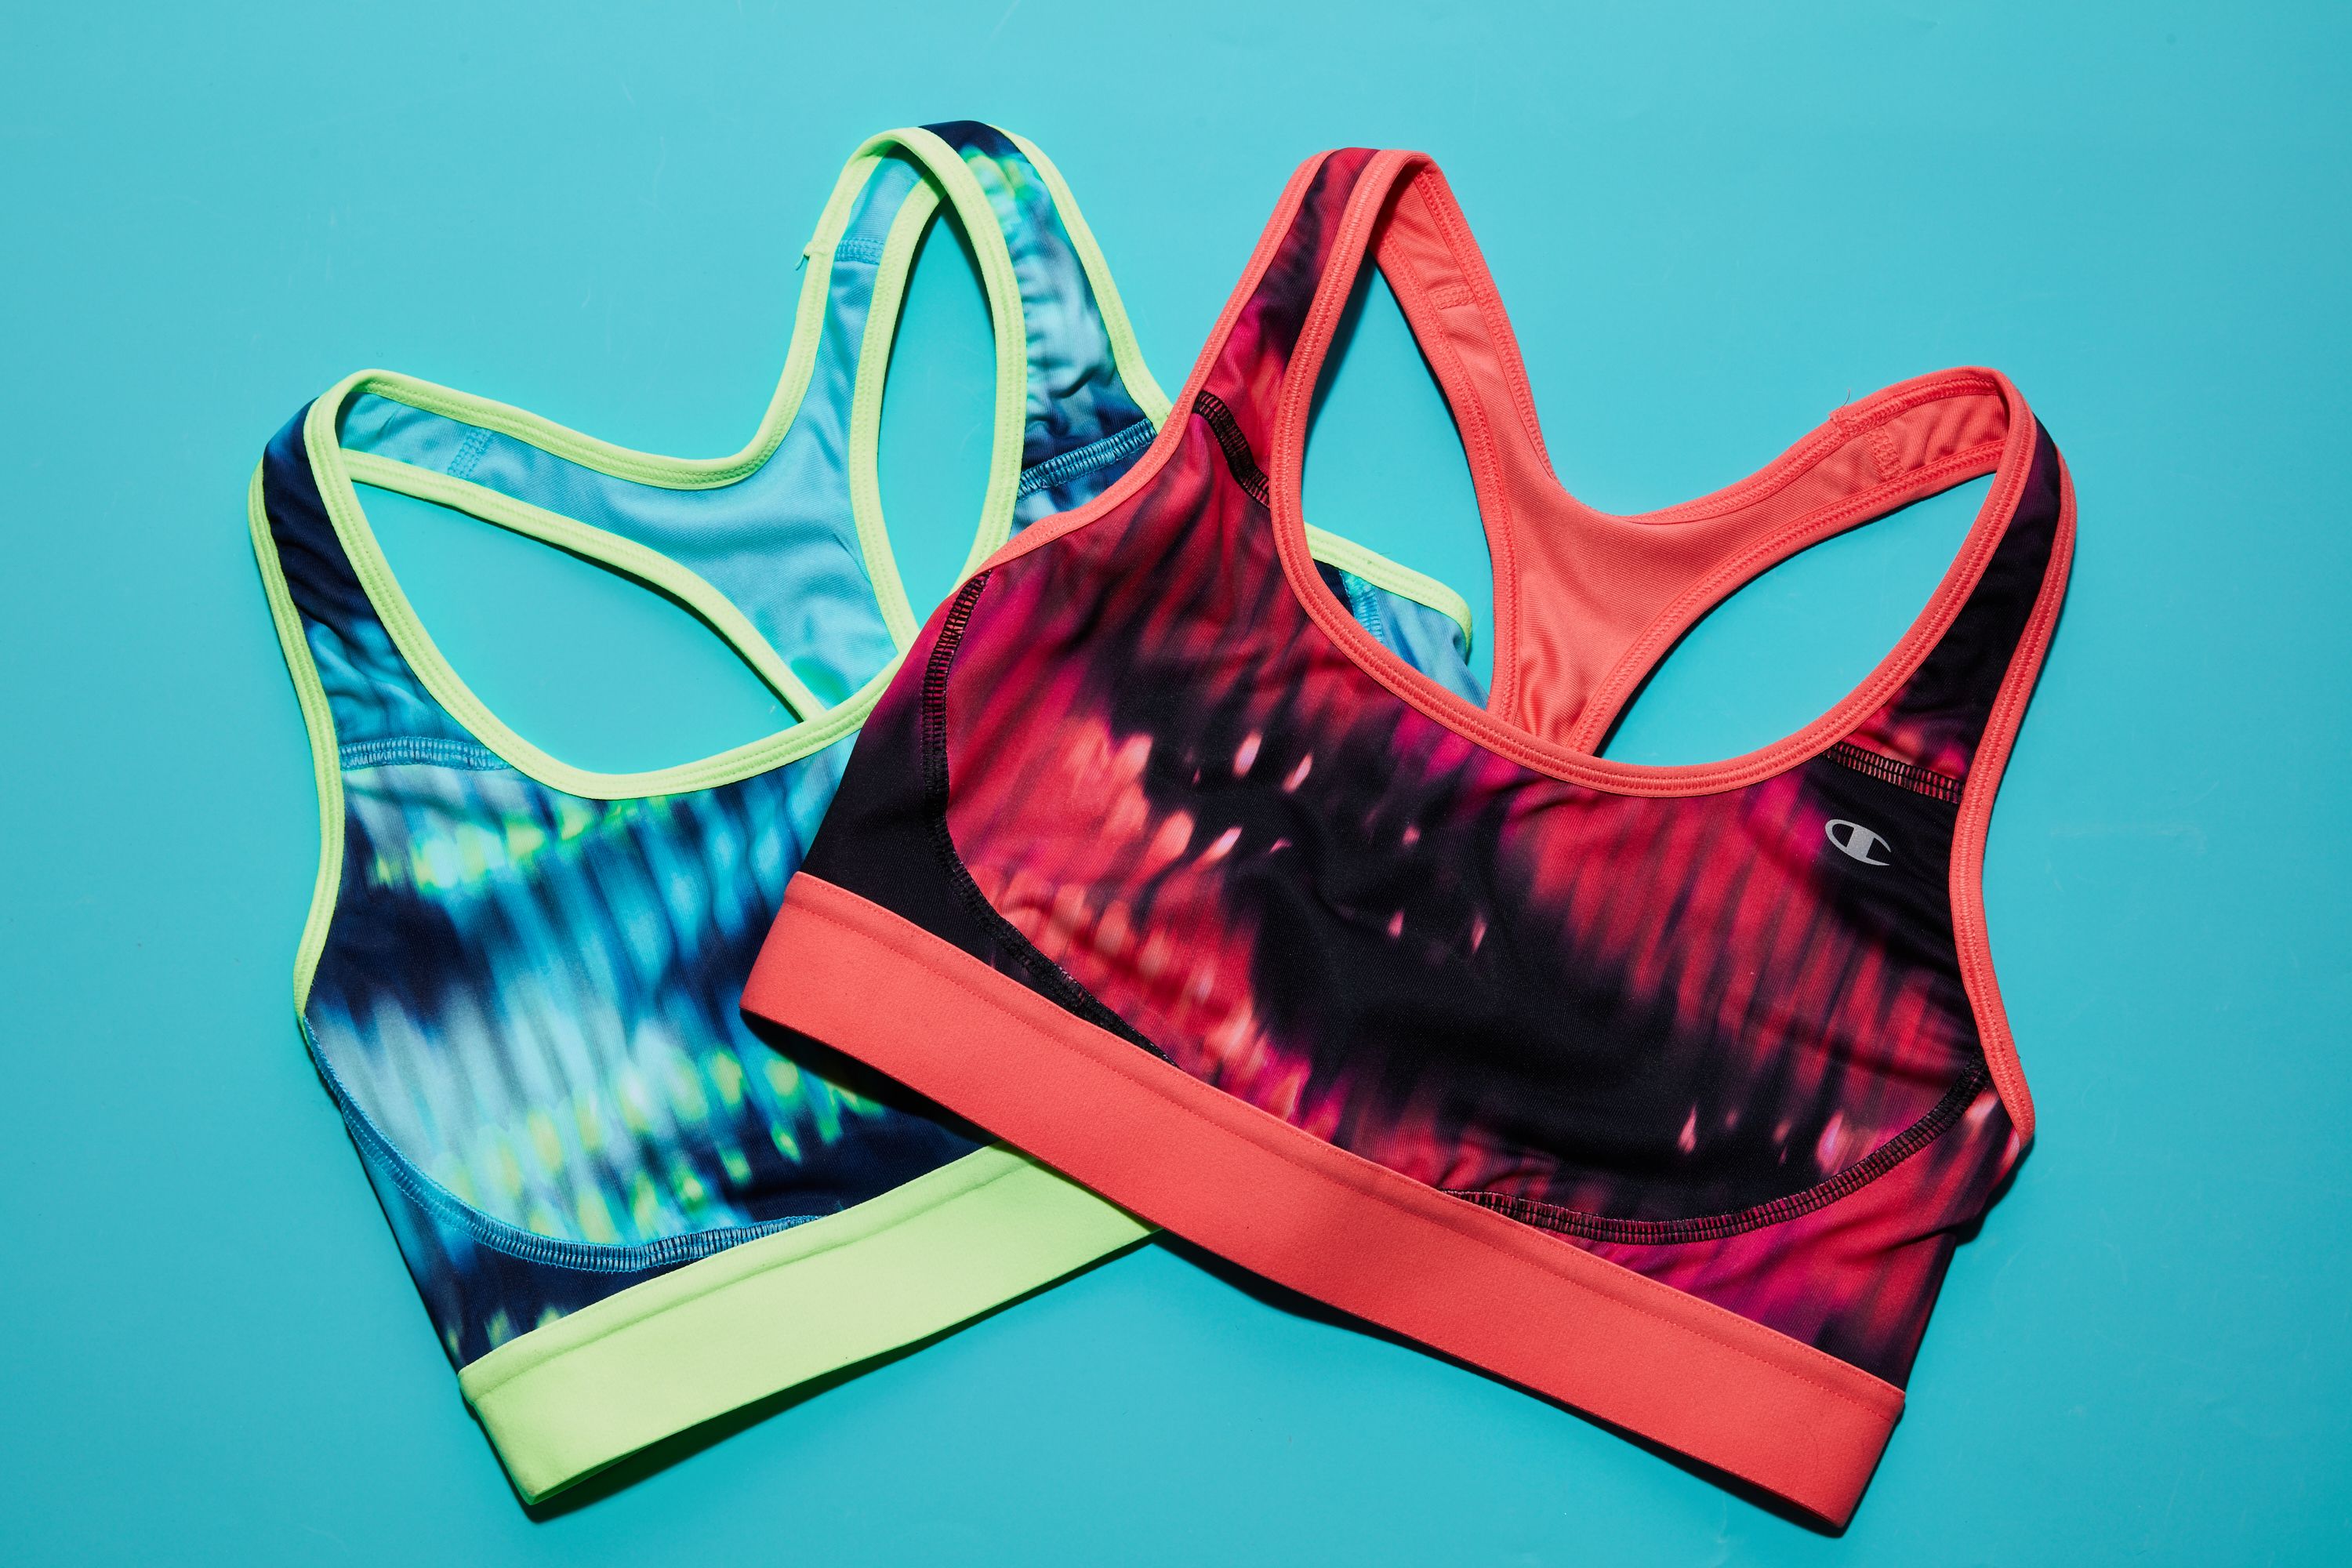 Champion The Absolute Workout sports bra